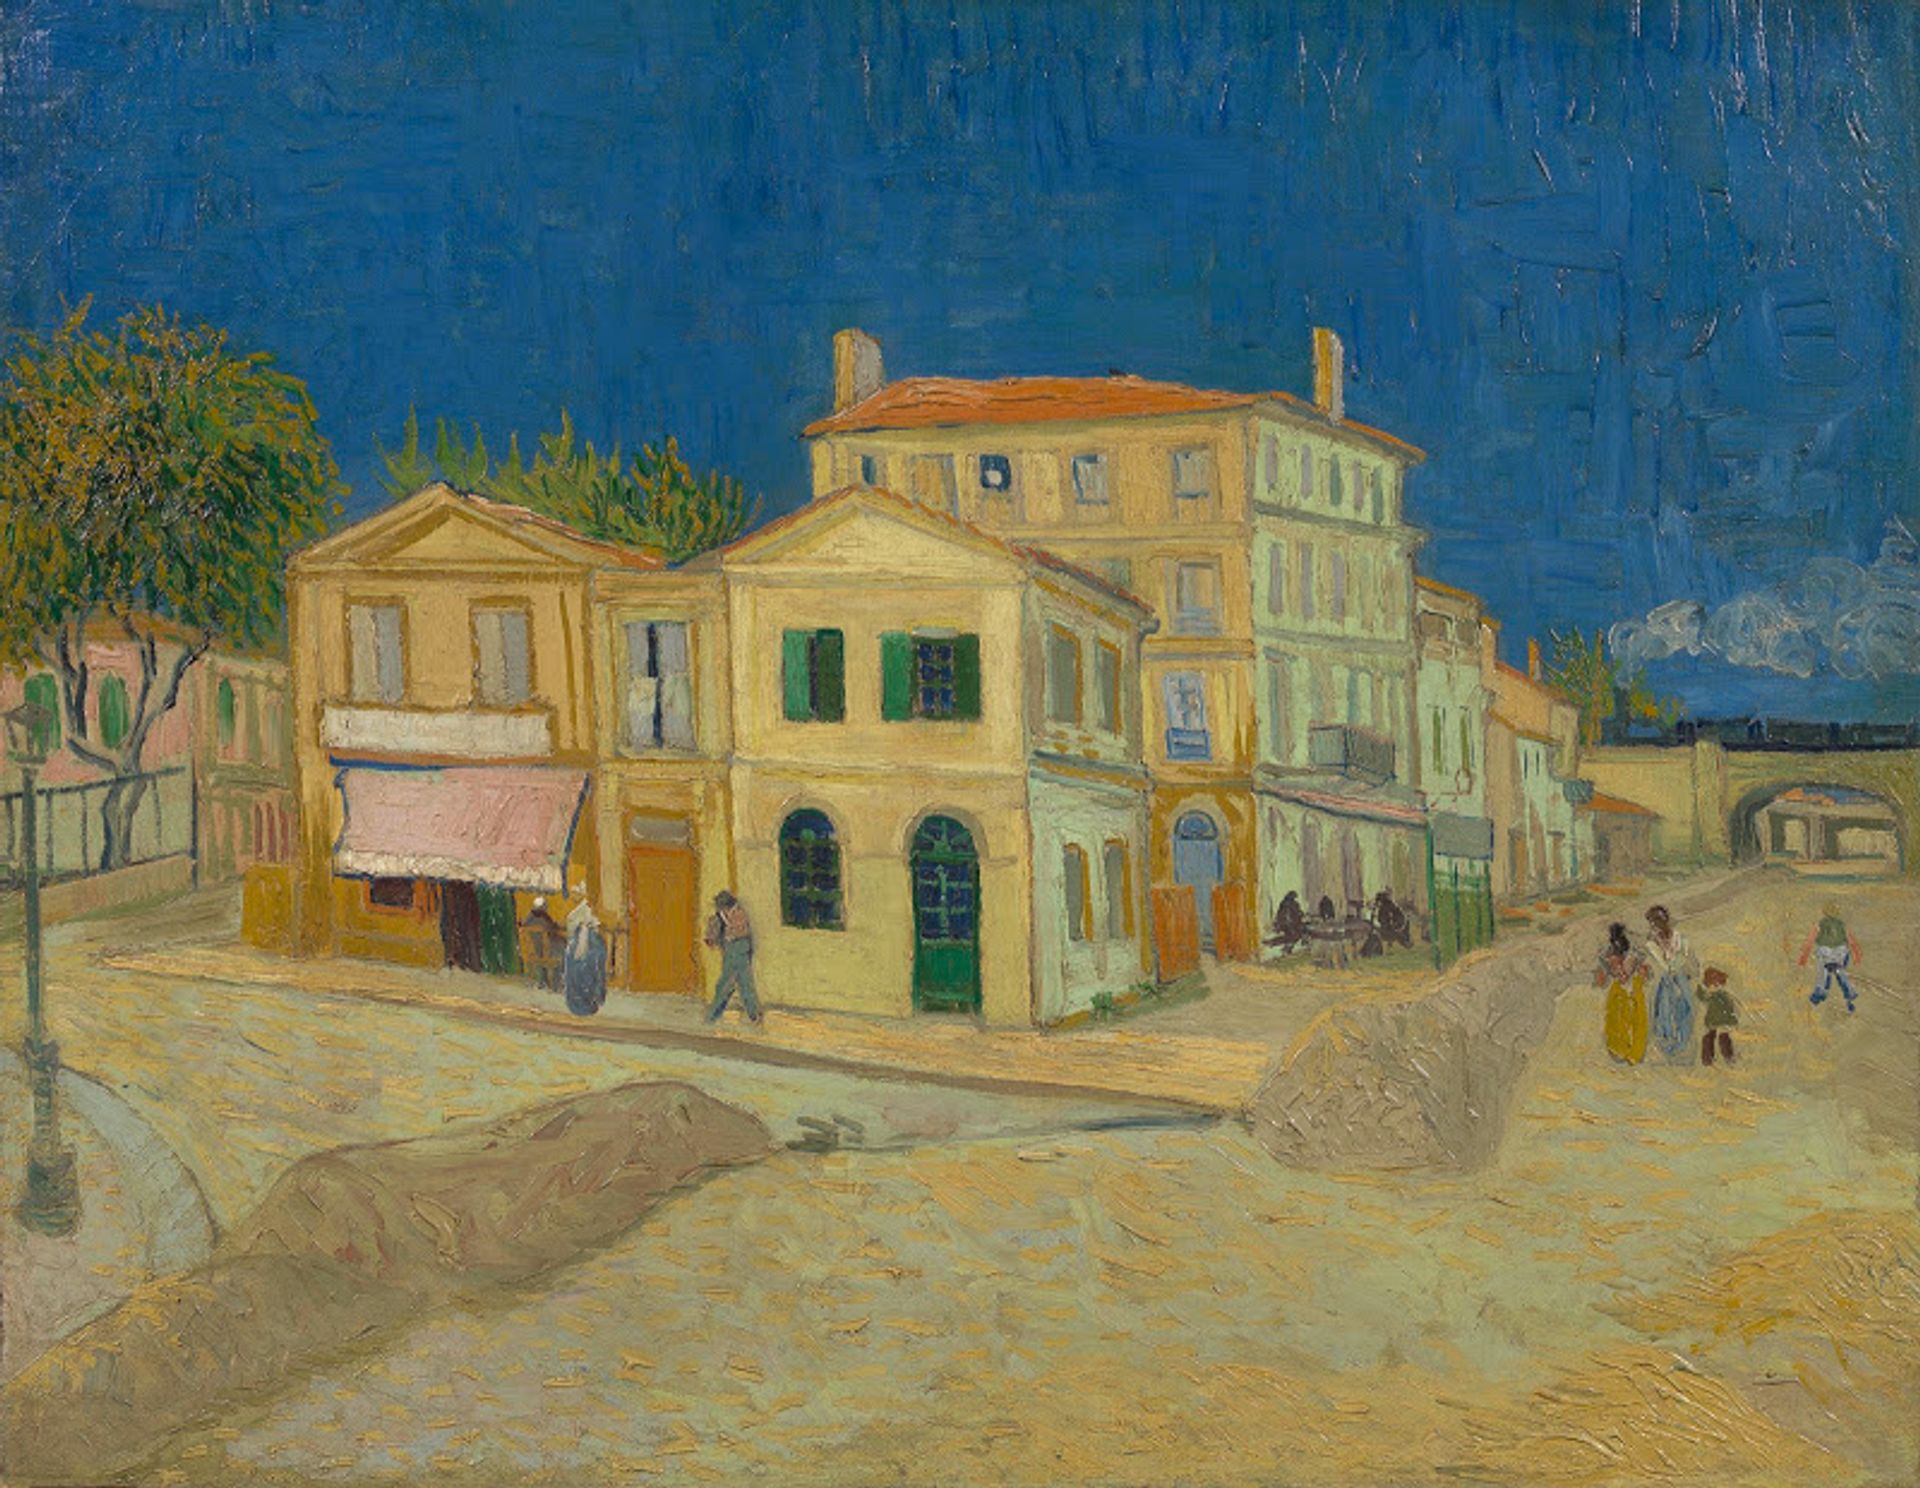 Vincent van Gogh’s The Yellow House (1888) Courtesy of the Van Gogh Museum, Amsterdam (Vincent van Gogh Foundation)